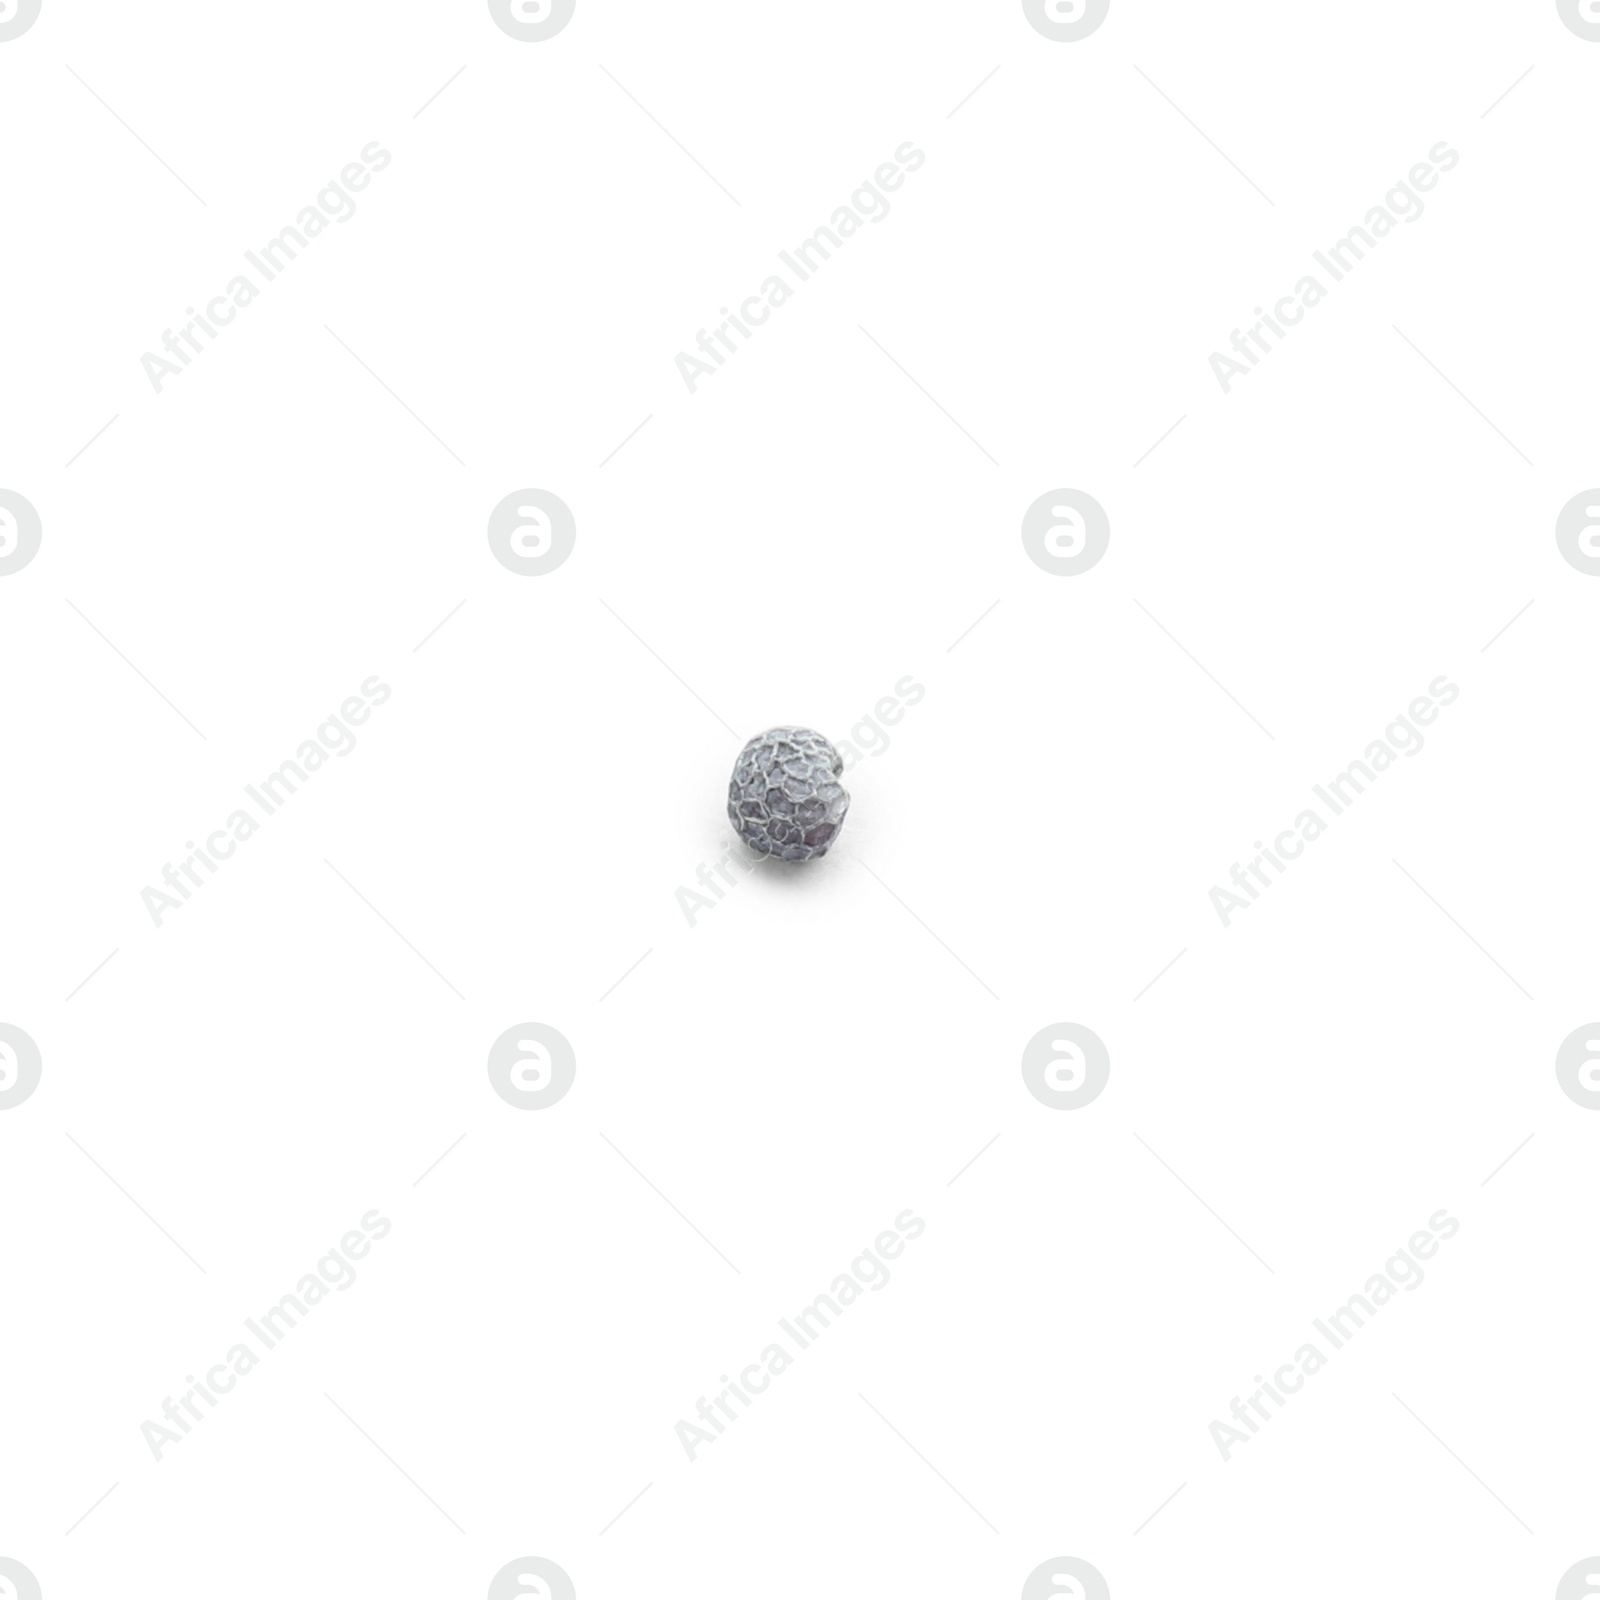 Photo of Single small poppy seed isolated on white